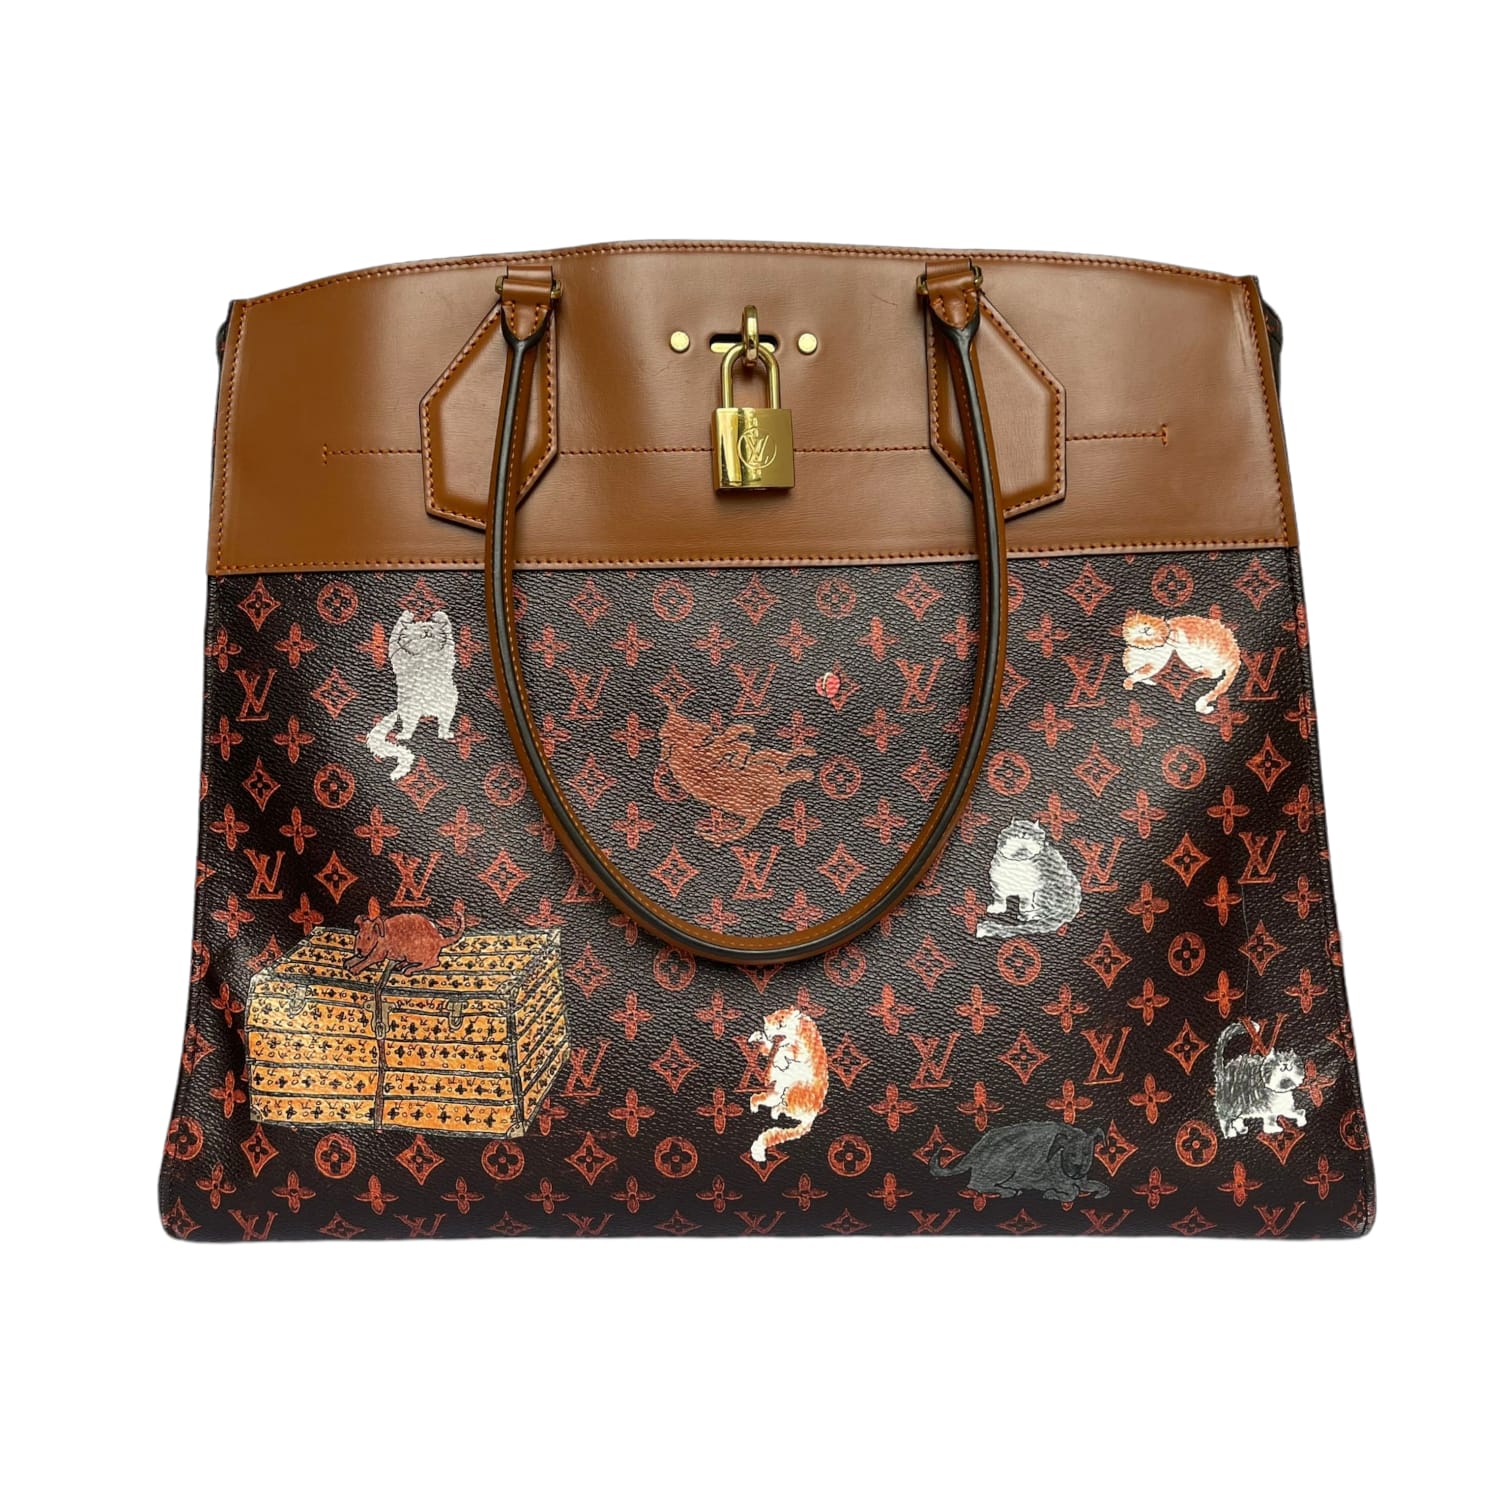 Sierra The Simmer's CC Finds — bergdorfsims: Louis Vuitton Boxes & Bags  Every